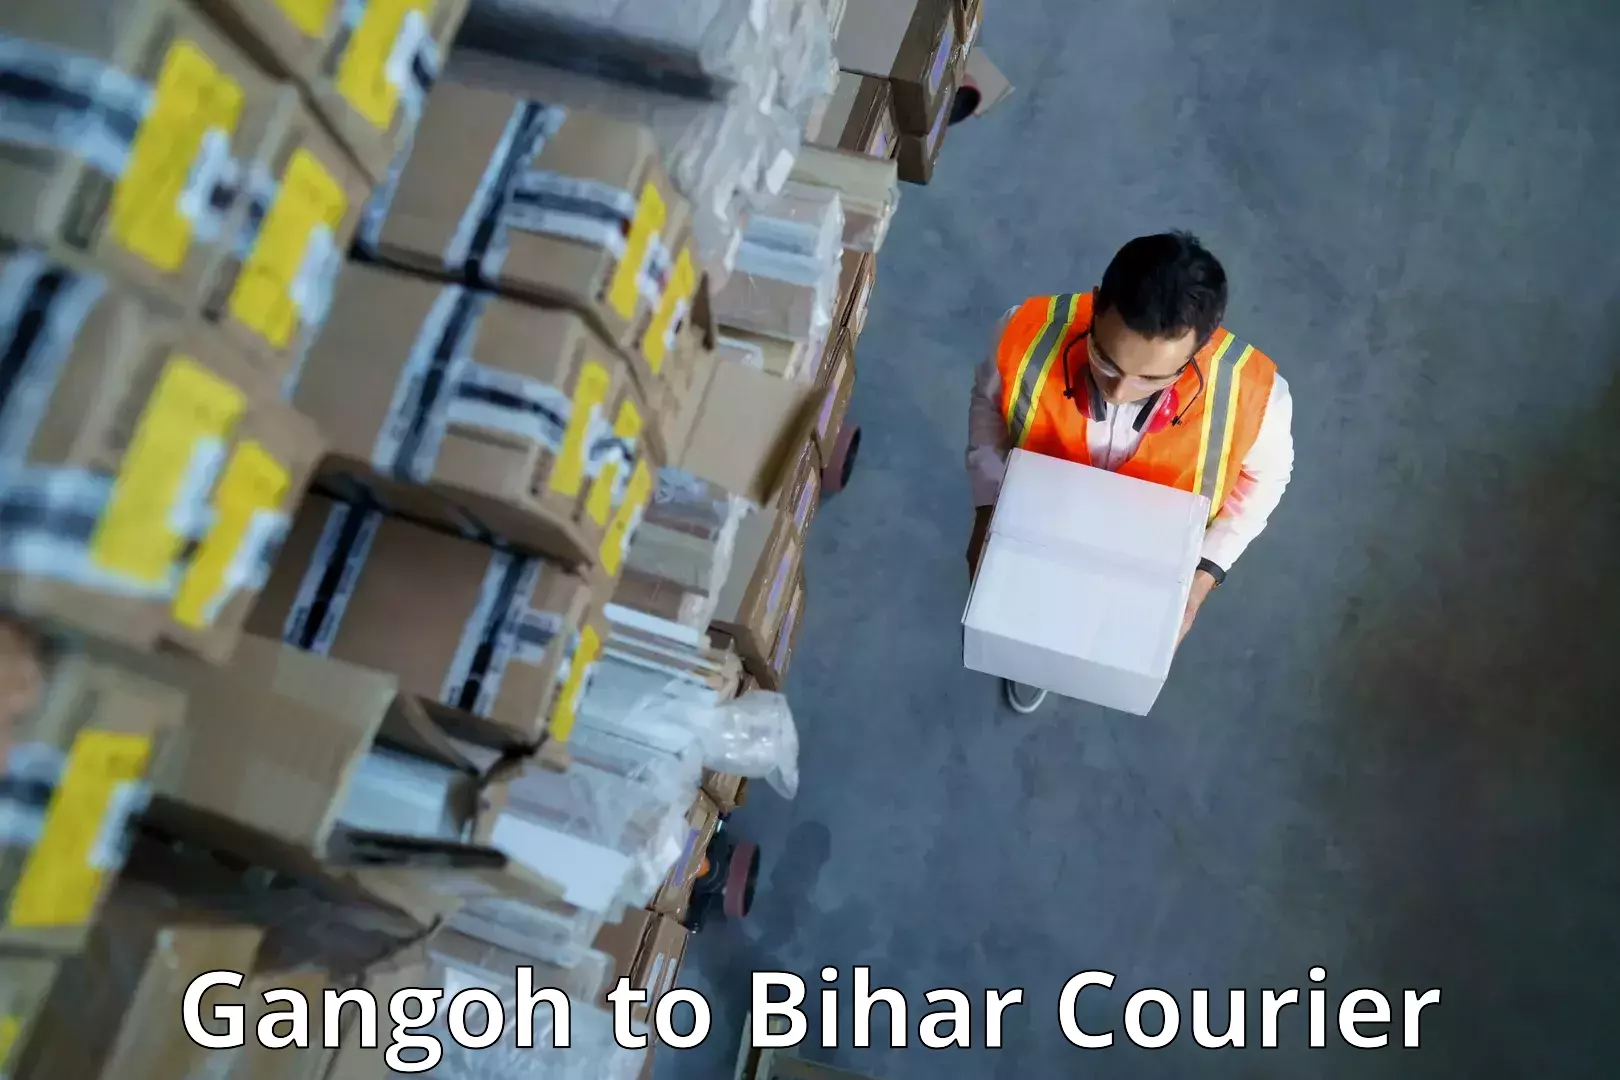 24/7 courier service in Gangoh to Bihar